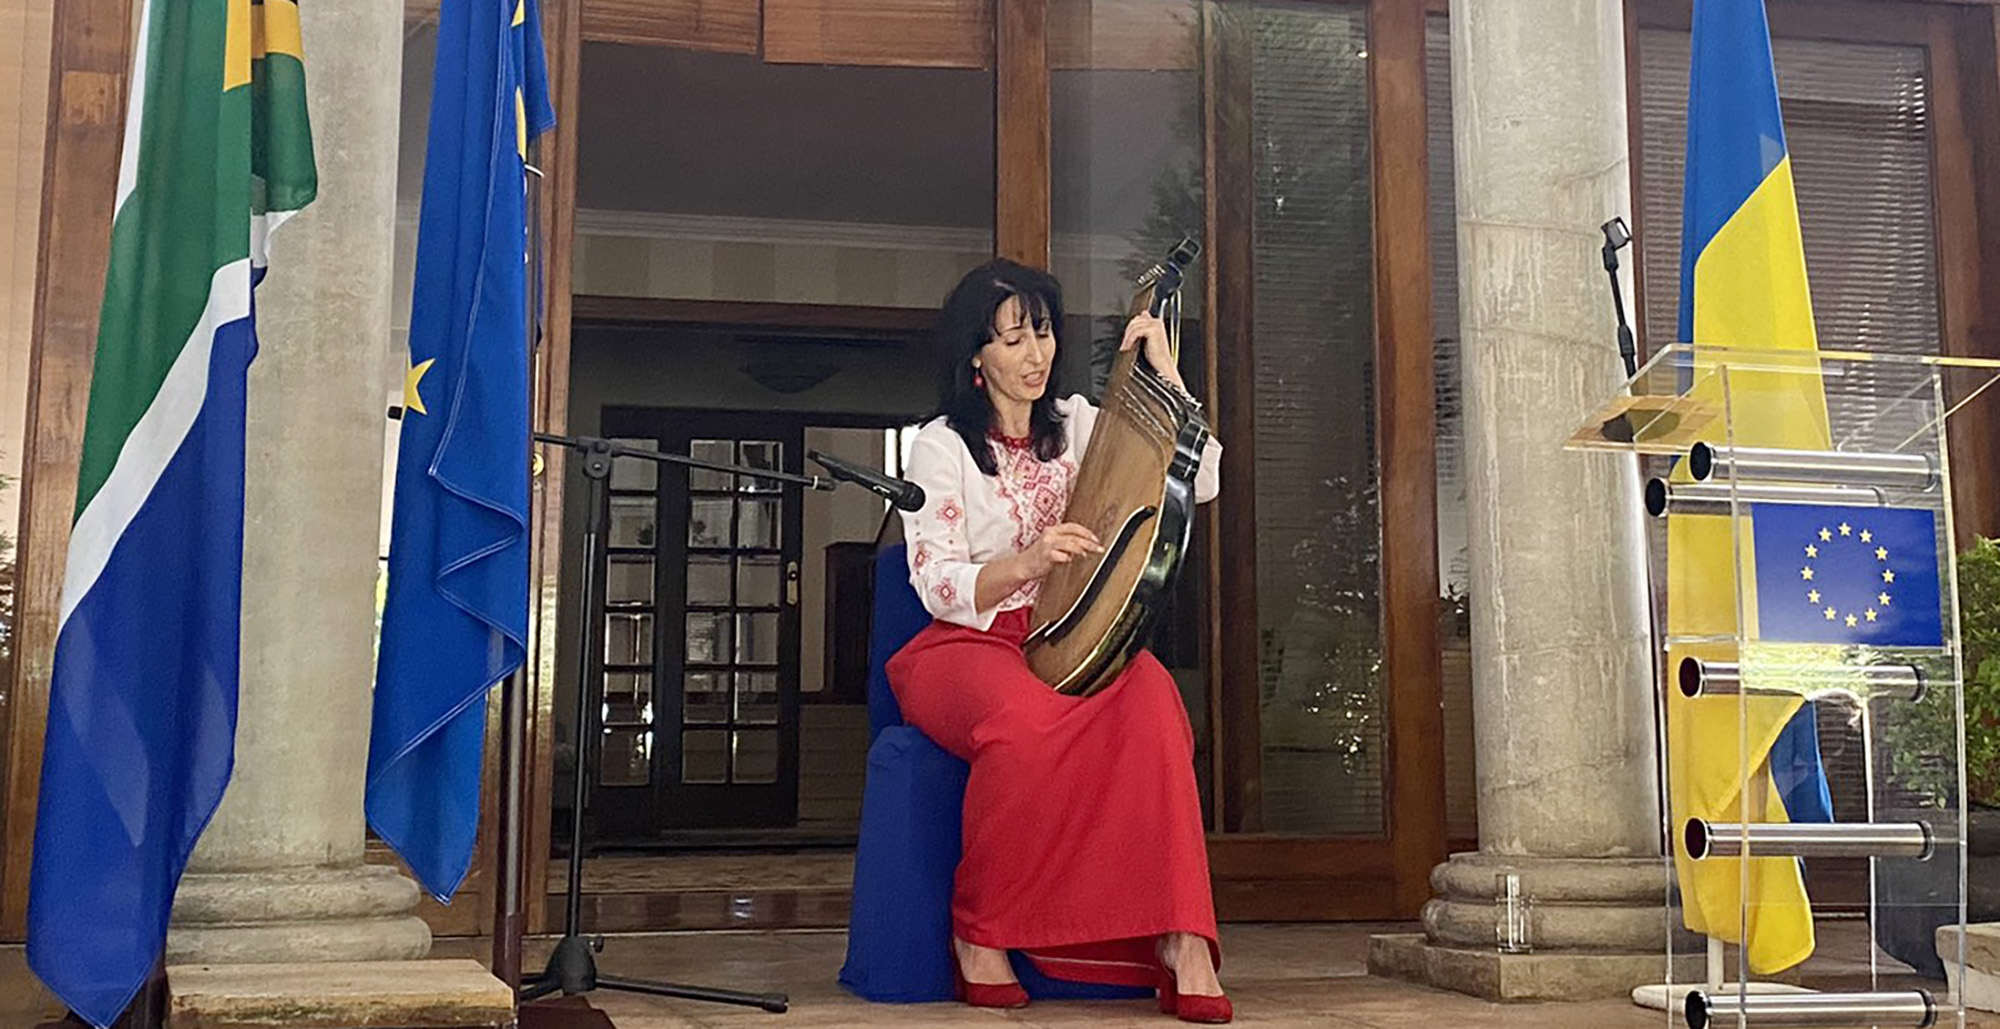 Nadiia Pryimak playing the bandura Delegation of the European Union to South Africa